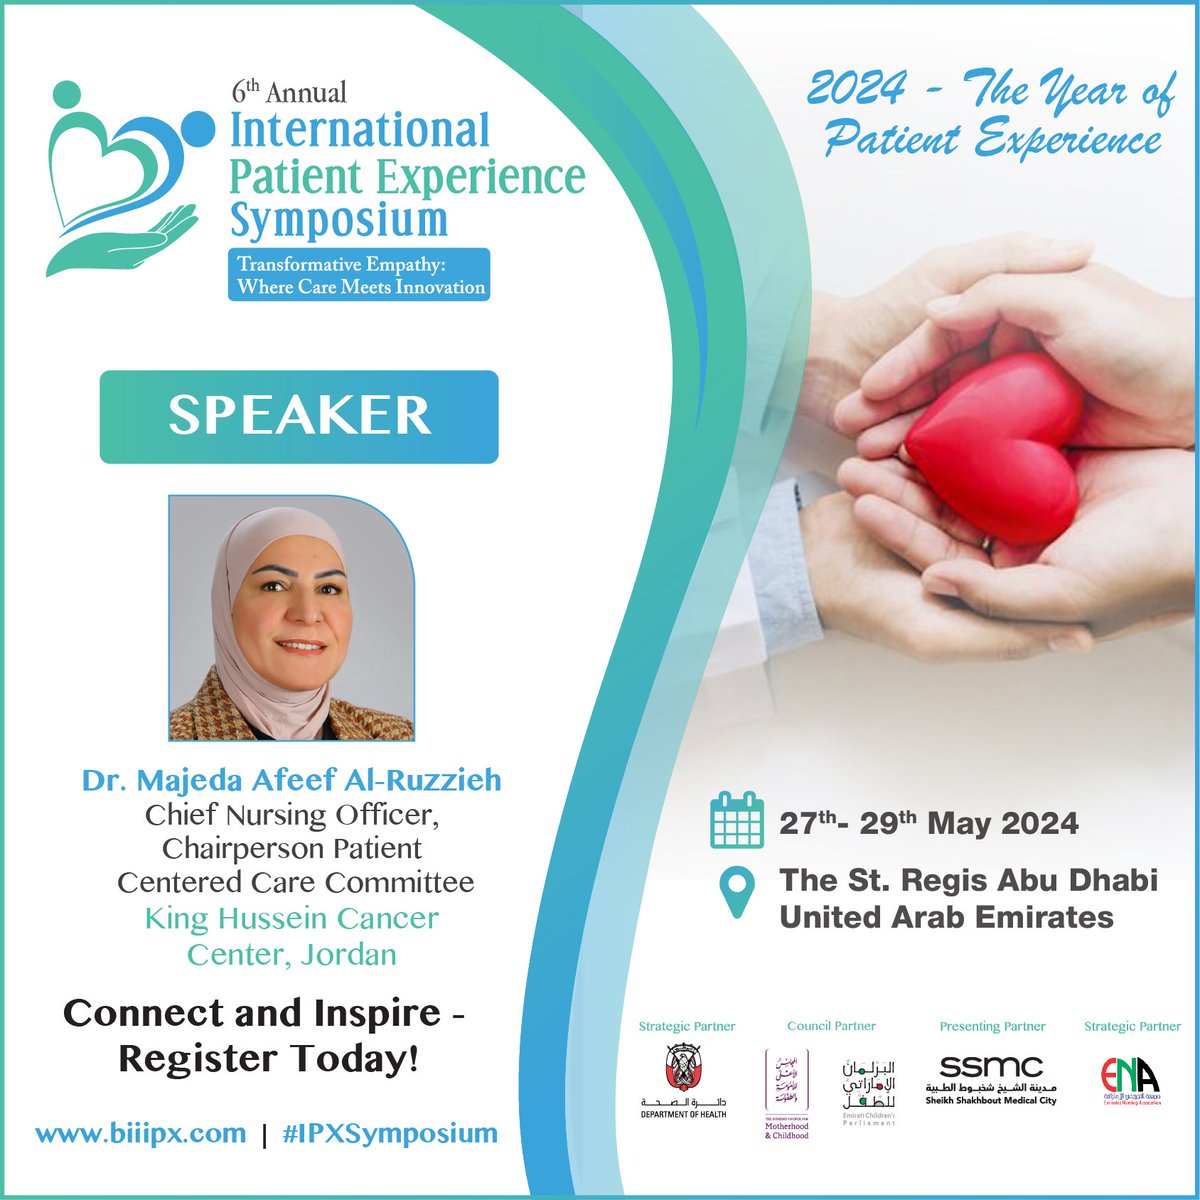 Dr. Majeda Afeef Al-Ruzzieh, Chief #Nursing Officer at @KHCFKHCC, Jordan, will be joining us as a distinguished speaker at the 6th Annual International #PatientExperience Symposium! Register Now: biiipx.com/register
#IPXSymposium #IPX #PX2024 #HealthcareInnovation  #patients